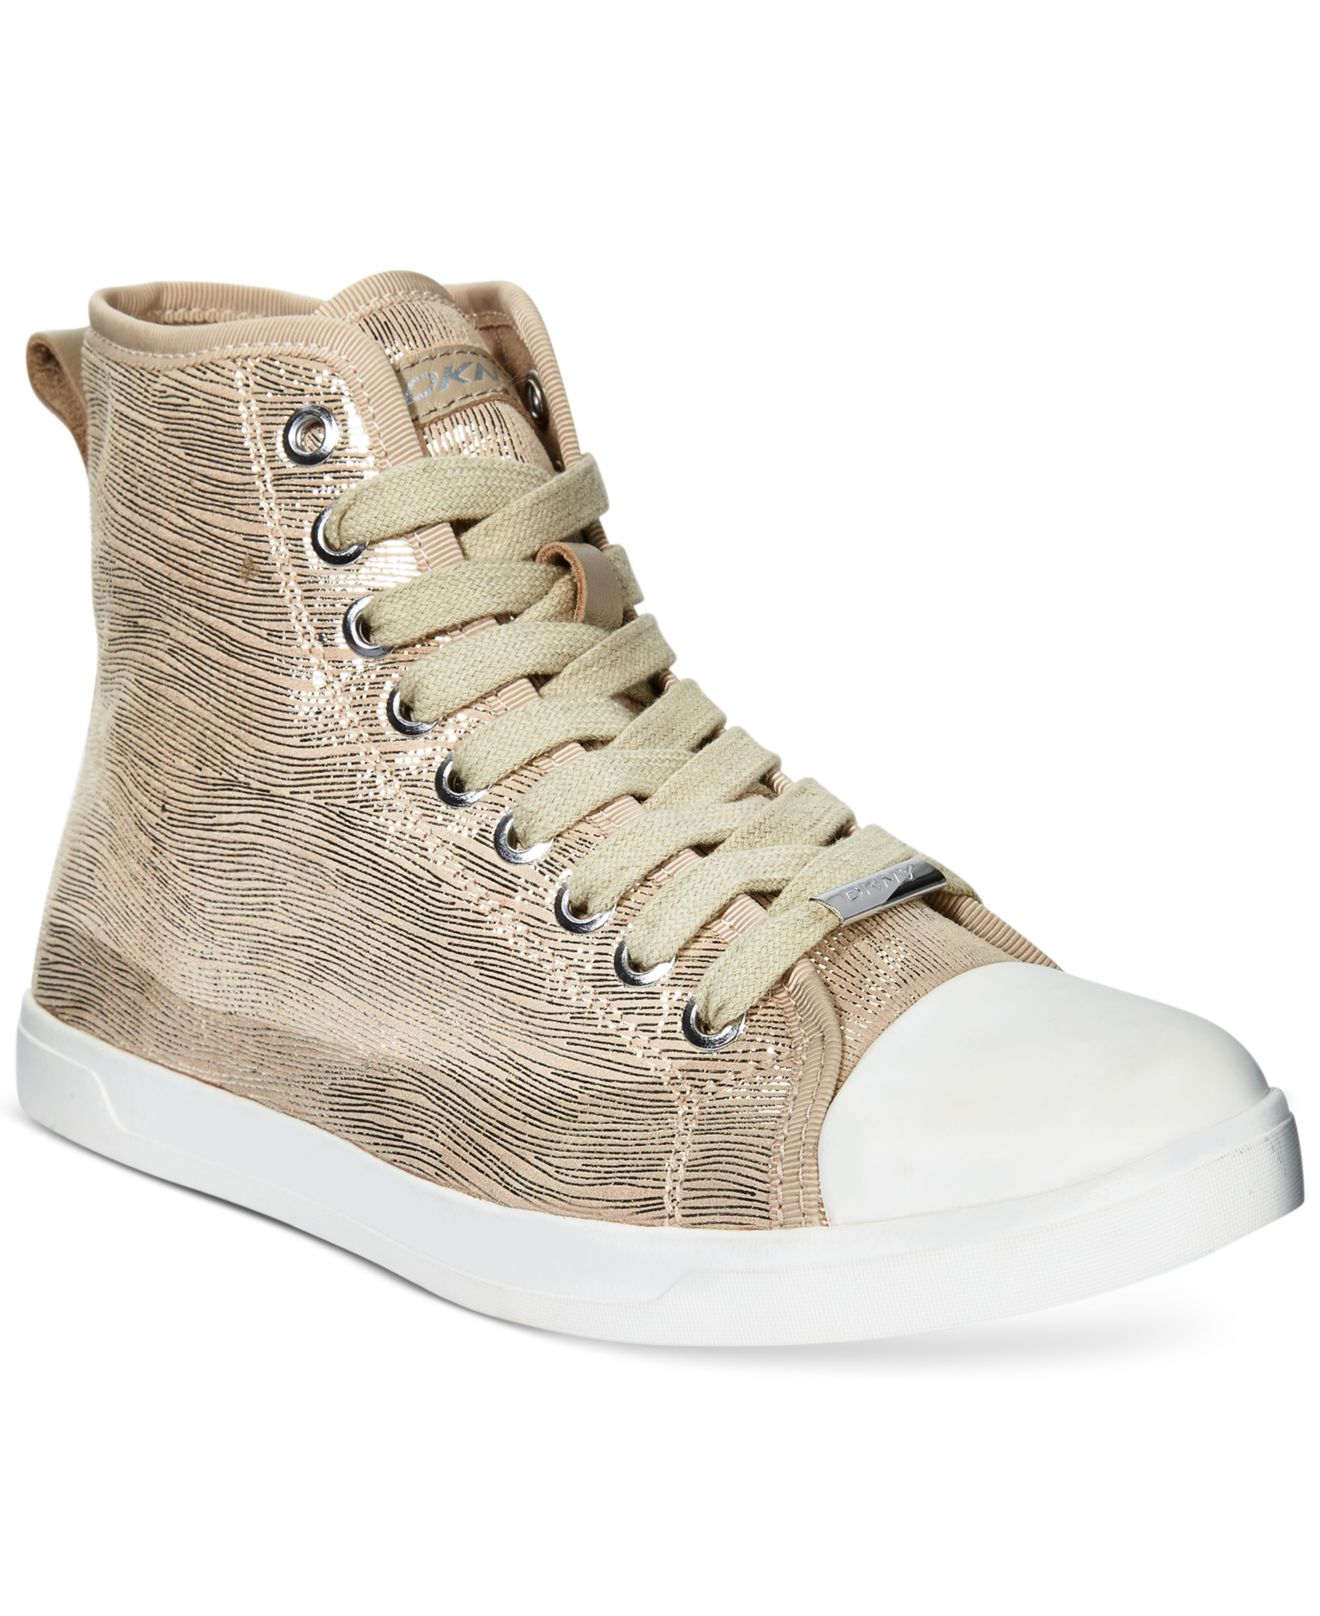 Lyst - Dkny Brave Lace-up Sneakers in Brown